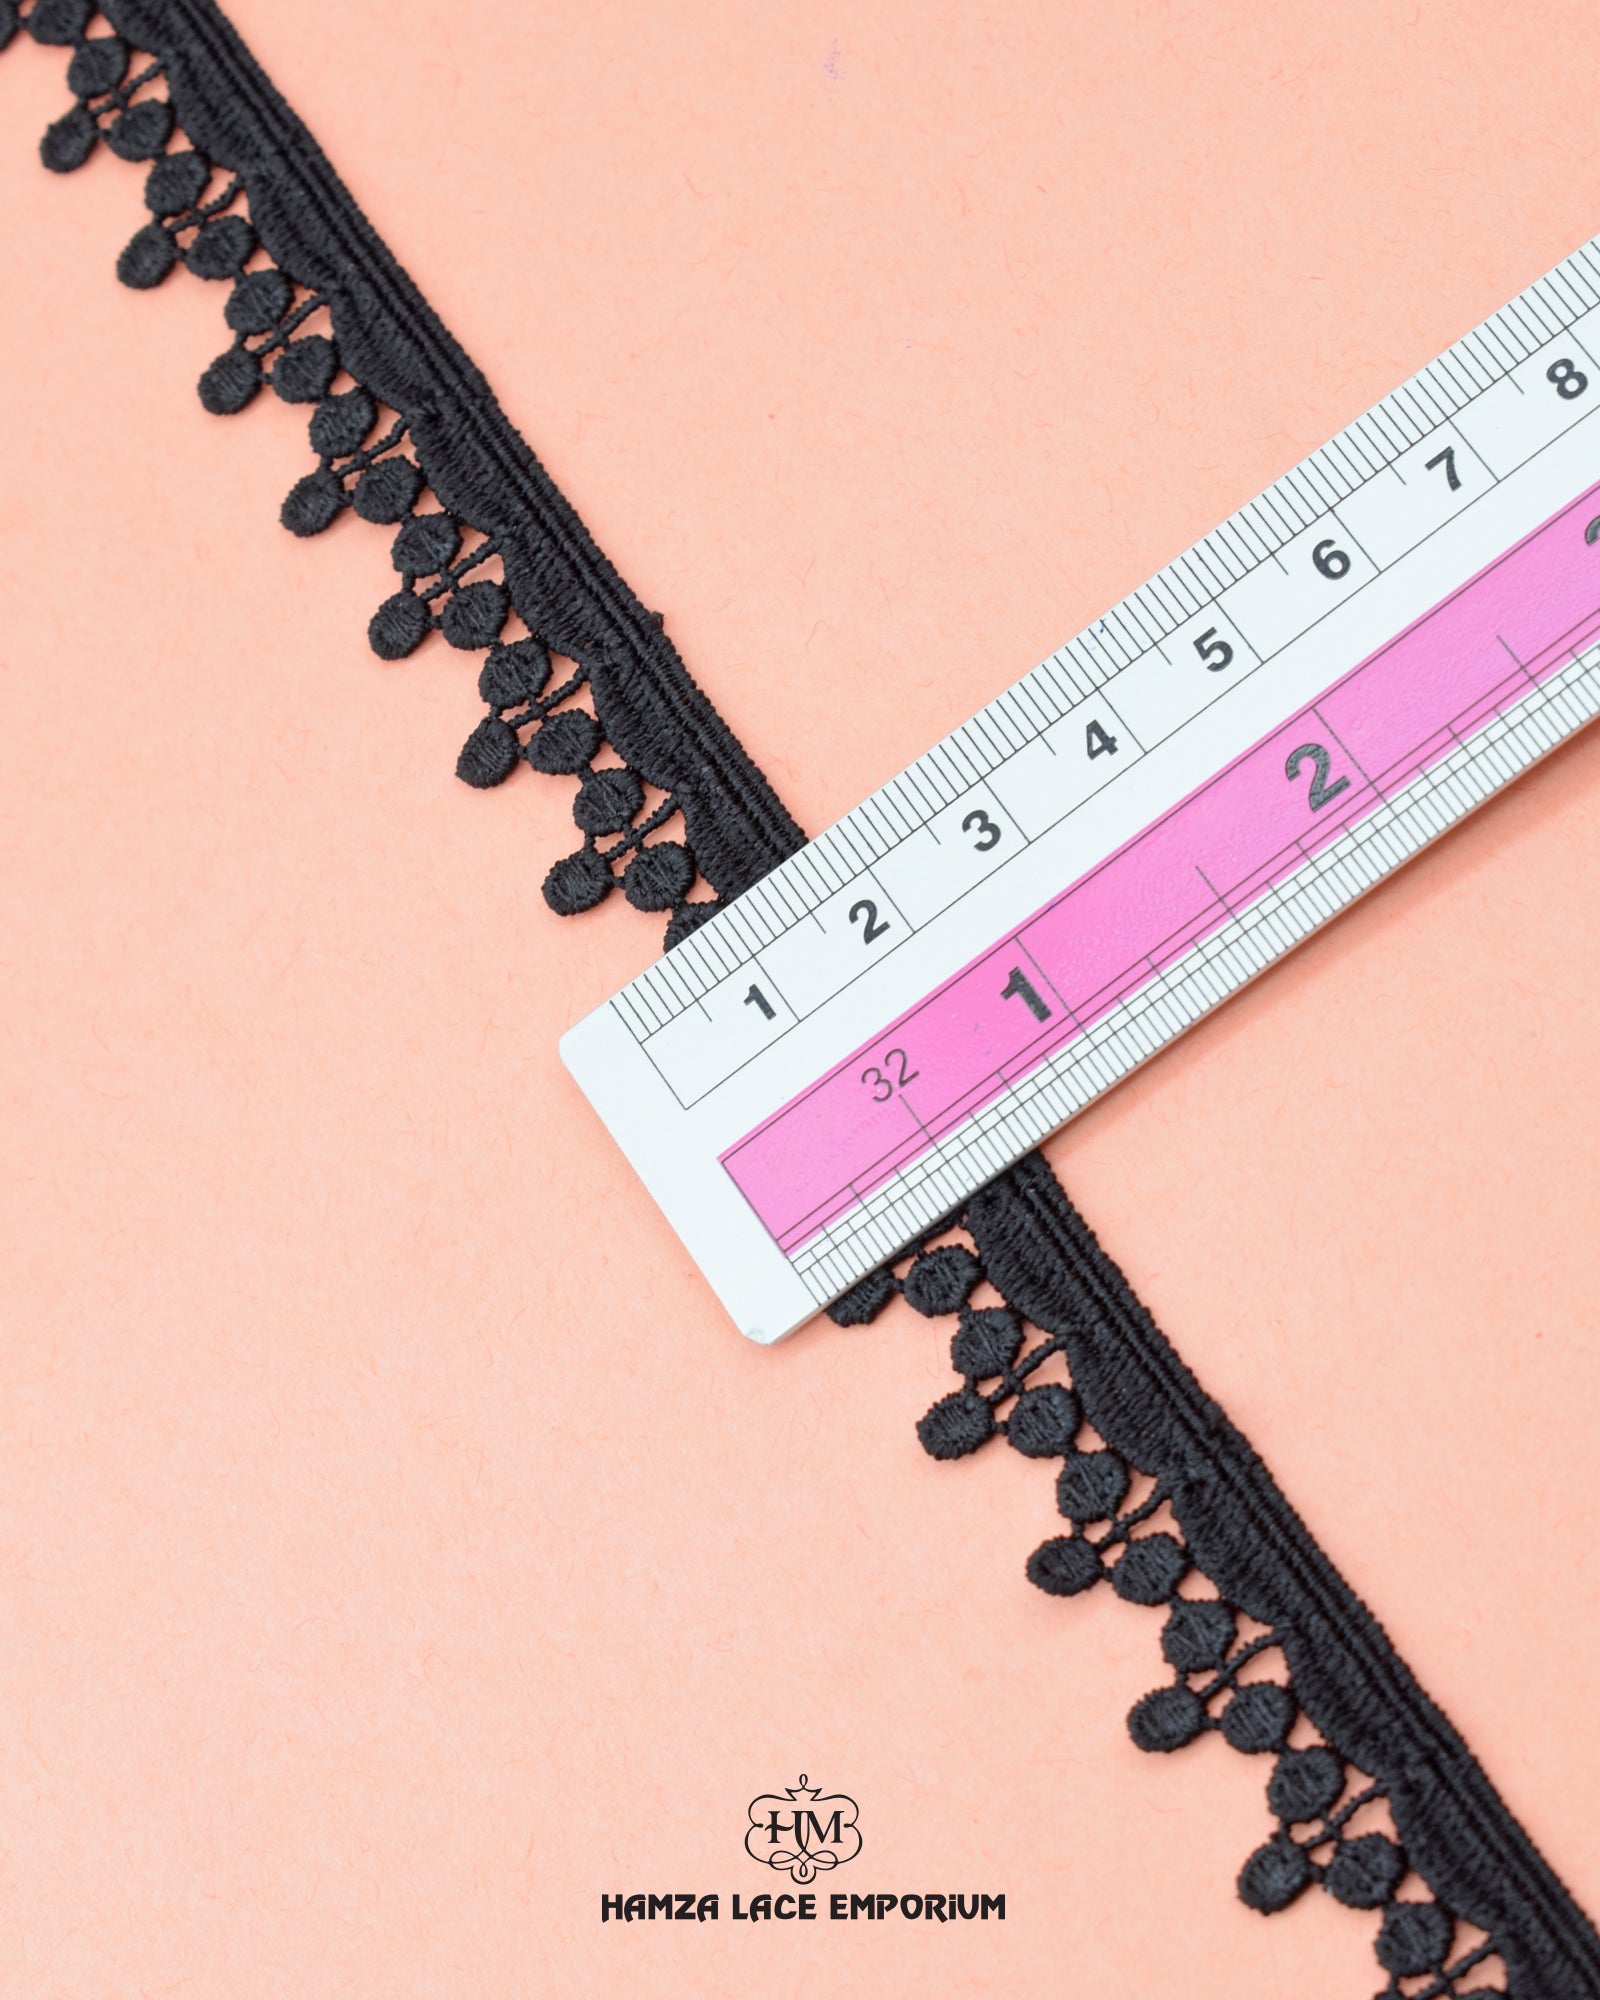 Size of the 'Edging Lace 7032' is shown with the help of a ruler as '0.75' inches